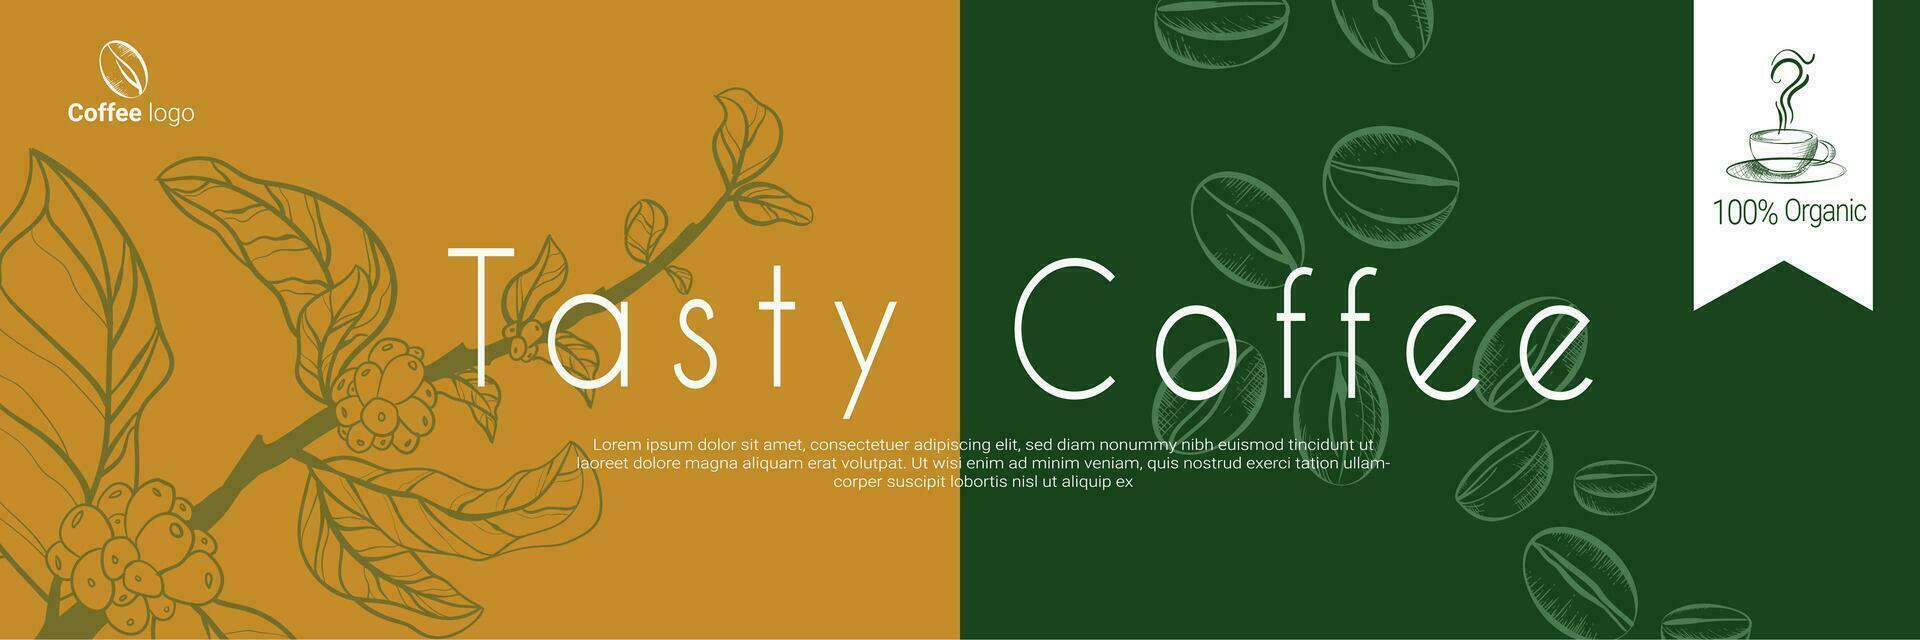 Vintage coffee shop banner template with vector coffee beans drawing in engraving style. Isolated coffee branch illustration on brown background. Panoramic coffee roasting banner. Organic caffeine.